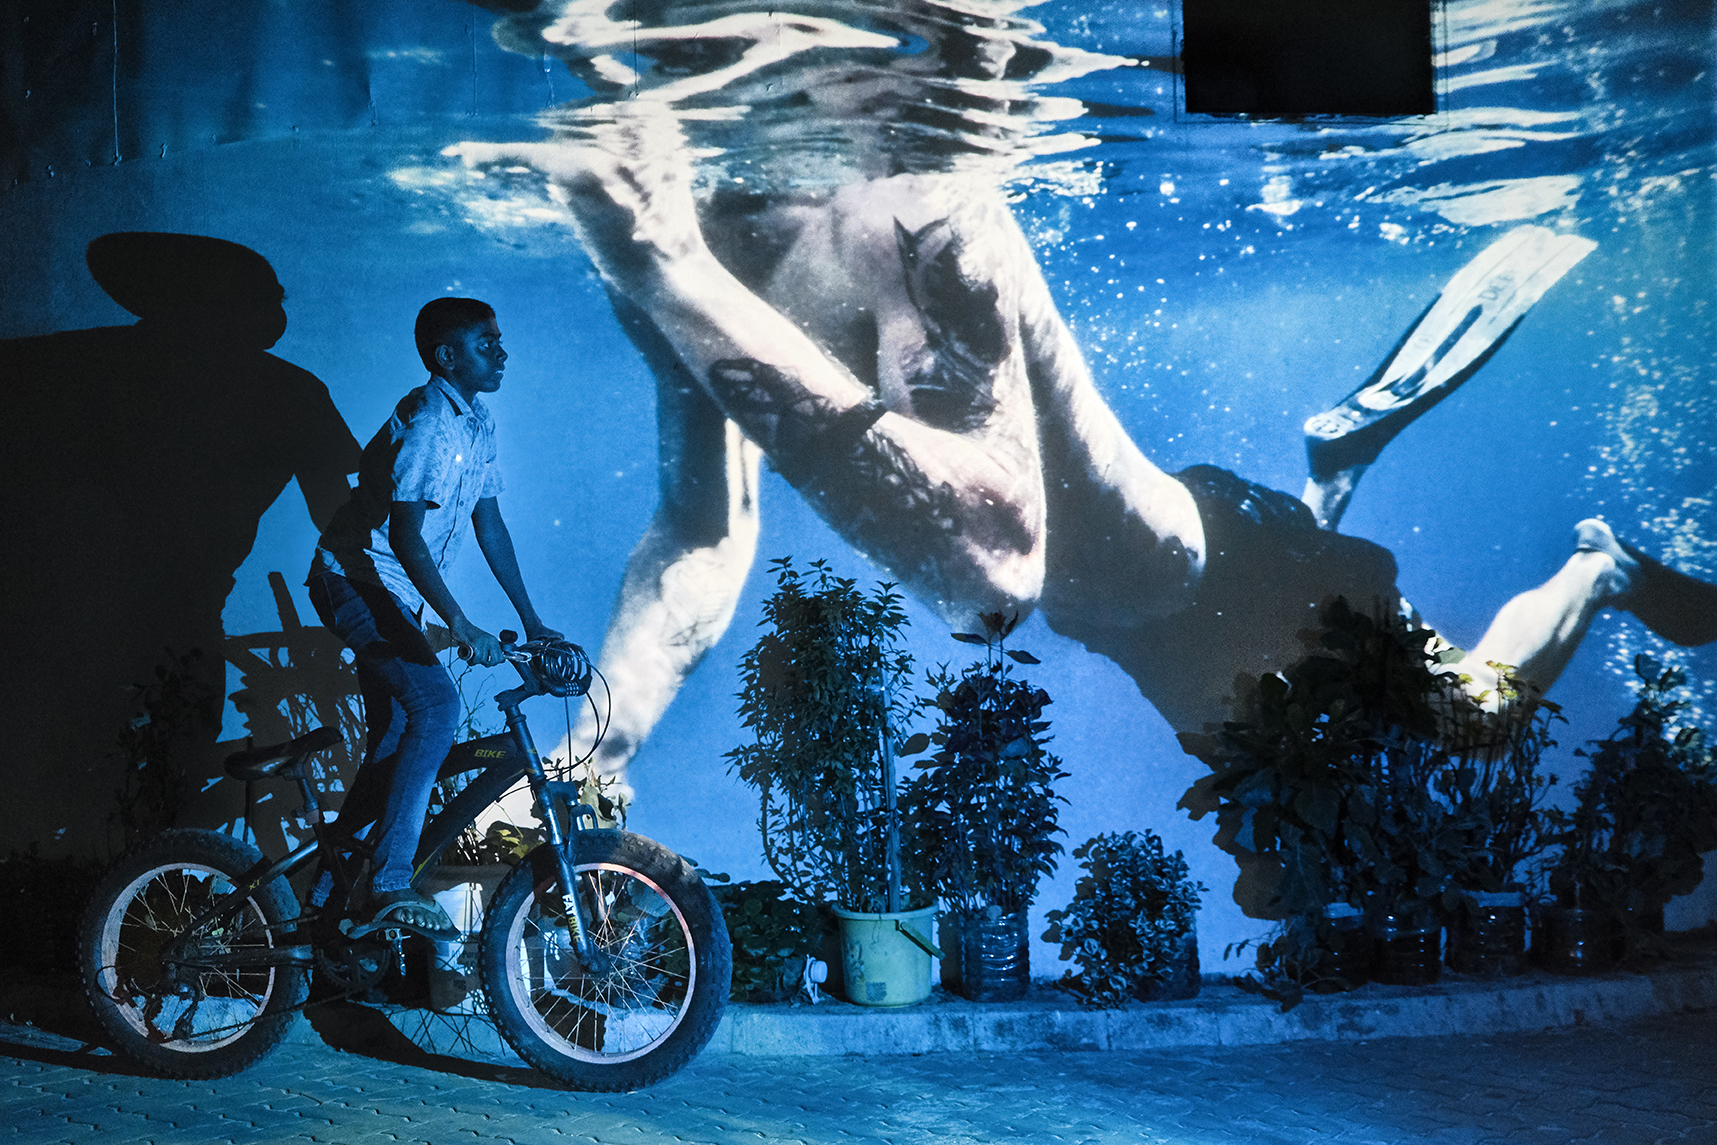 An underwater image is projected behind a man on a motorbike.